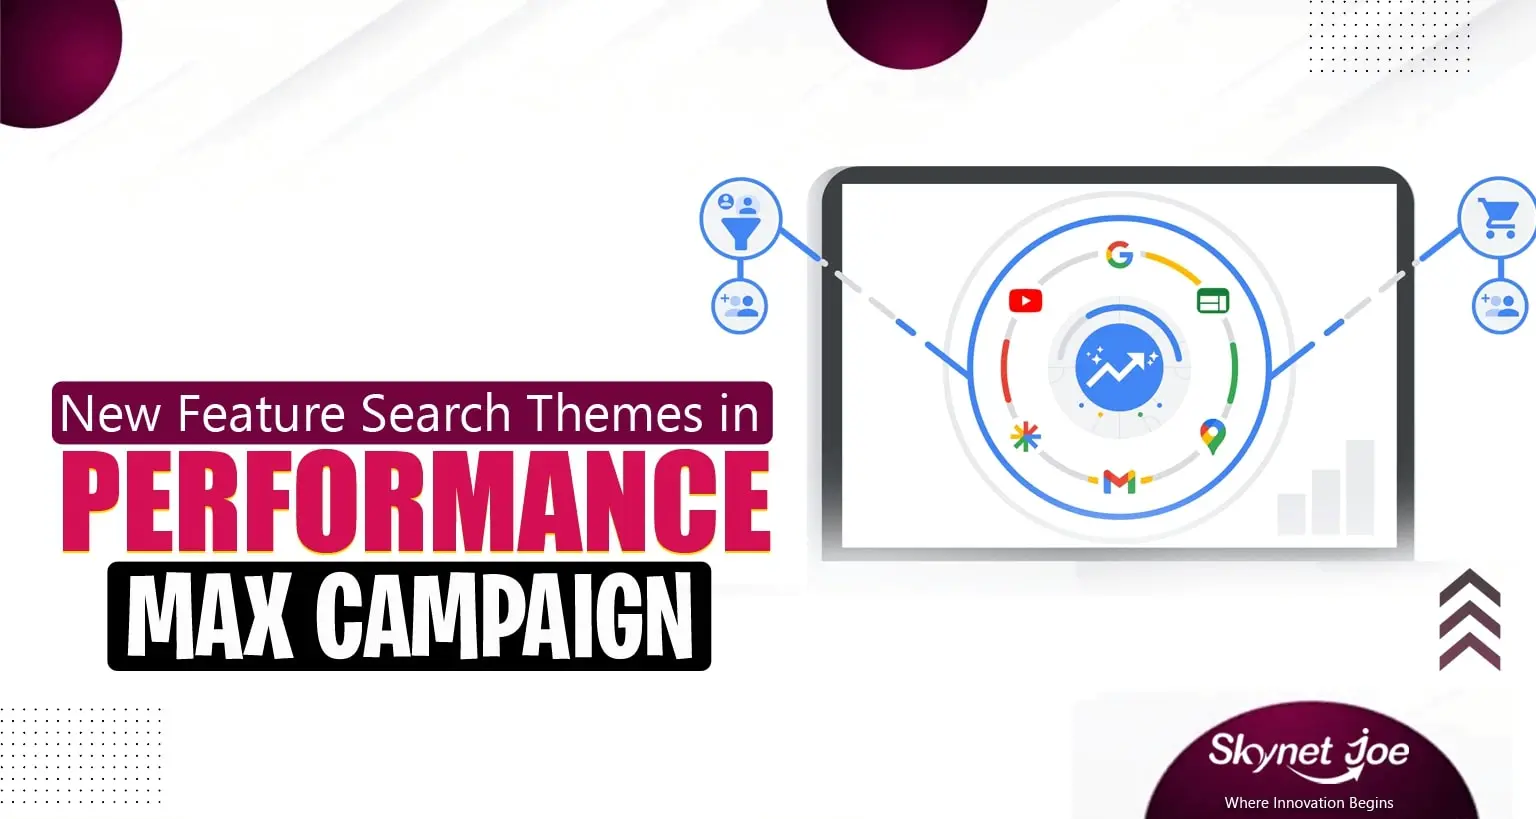 Illustration showing Search Themes in Performance Max Campaign of Google Ads, enhancing ad relevance and engagement.